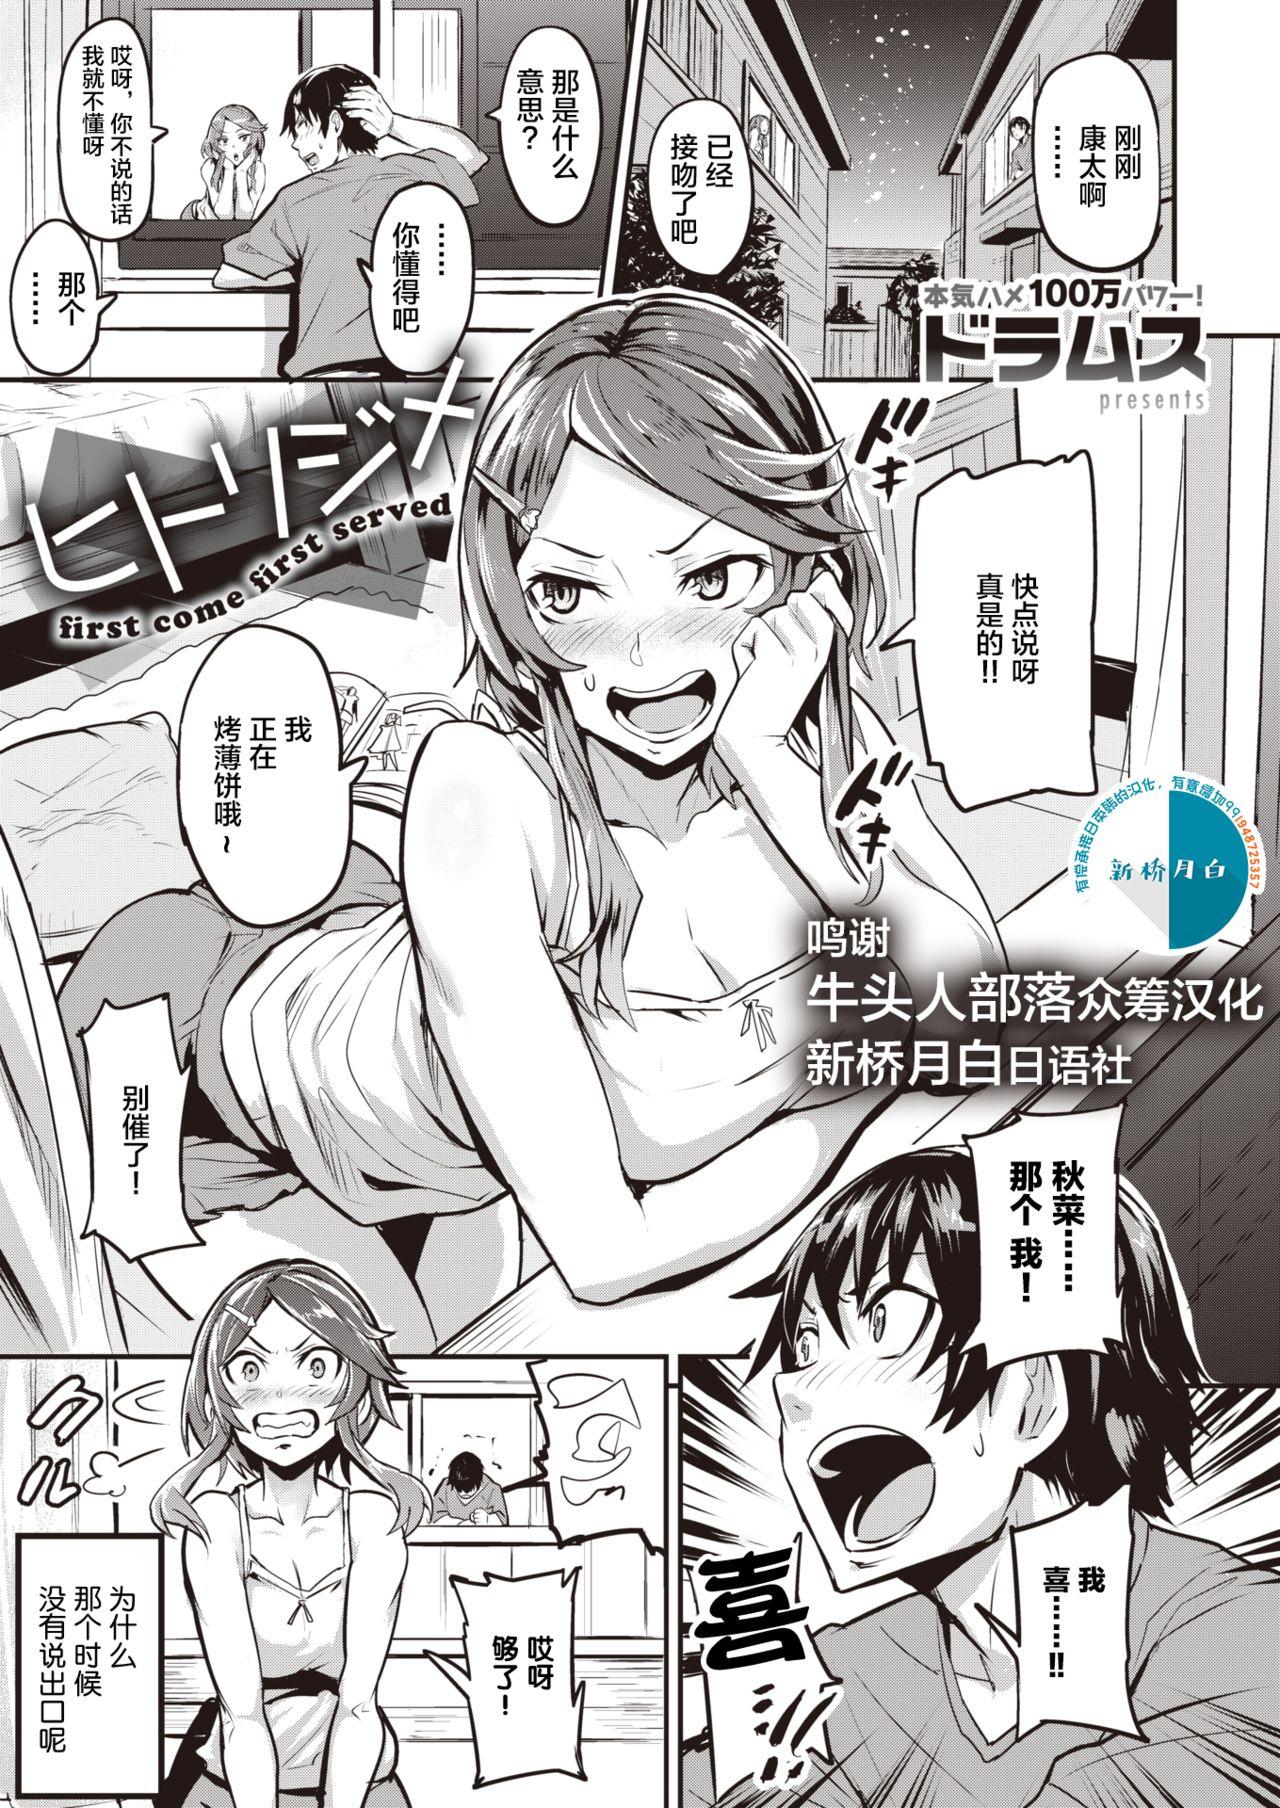 Best Blow Job [Dramus] Hitorijime - first come first served Ch. 1-3 [Chinese] [牛头人部落×新桥月白日语社] Camsex - Page 1